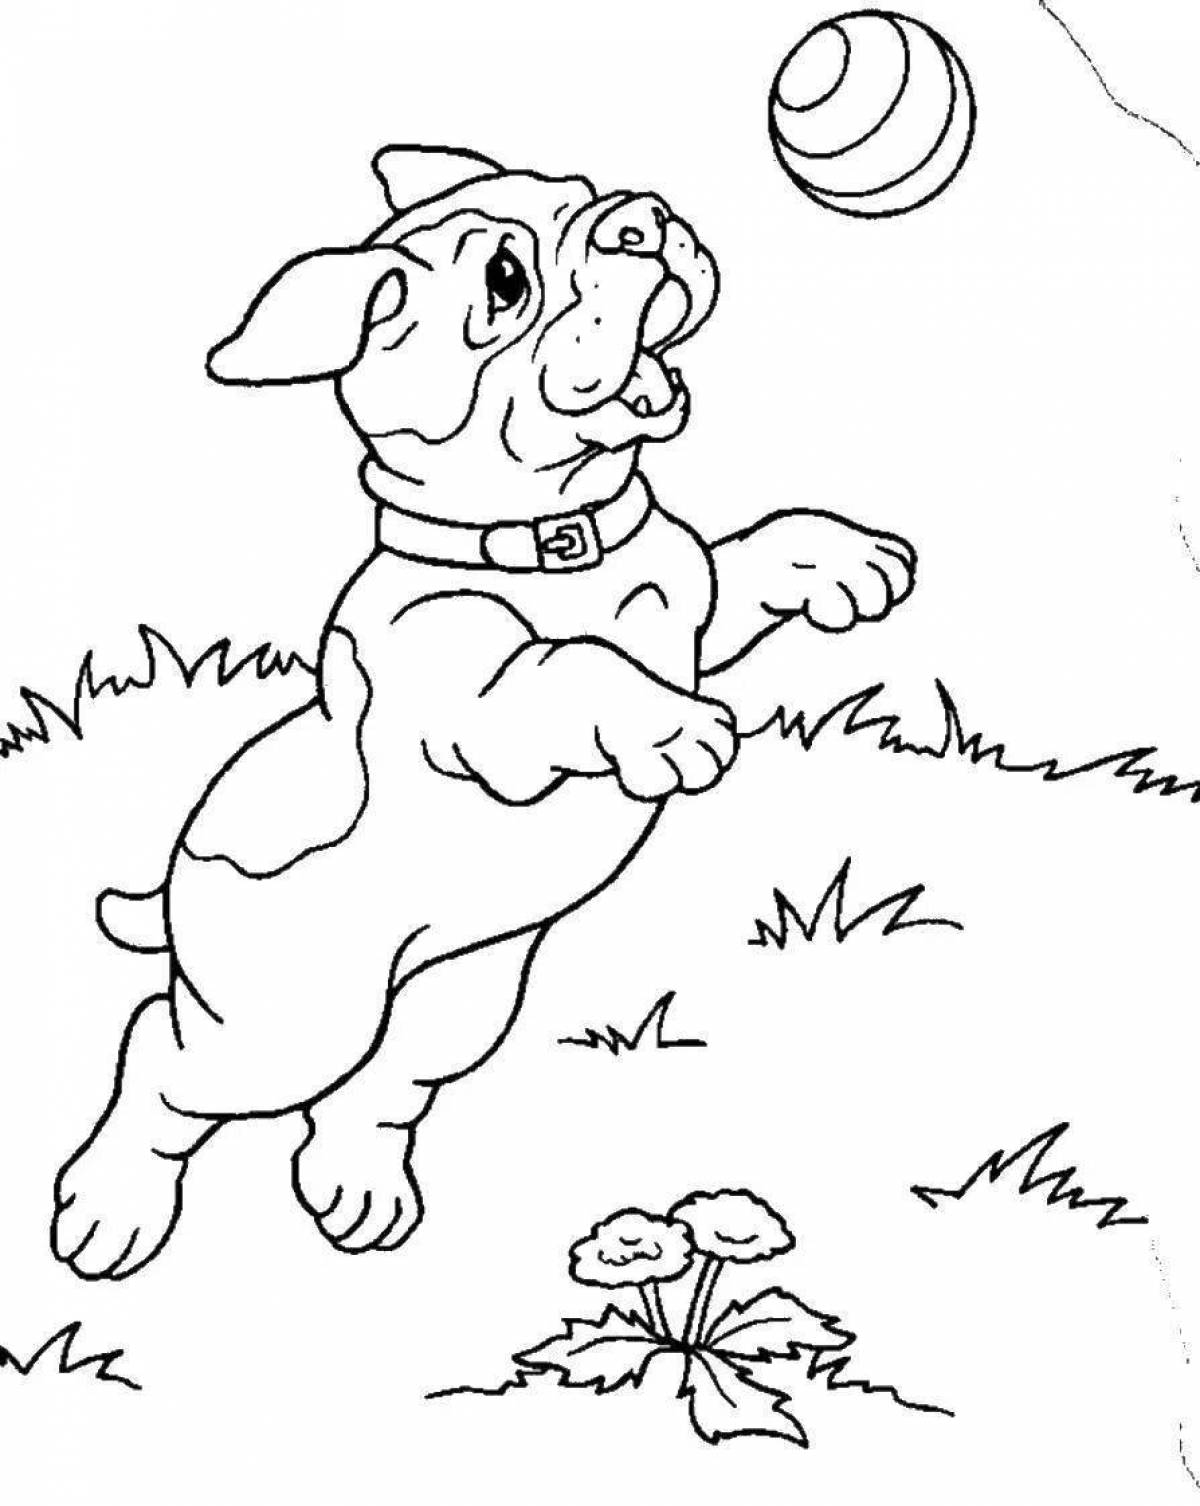 Cute dog coloring pages for boys